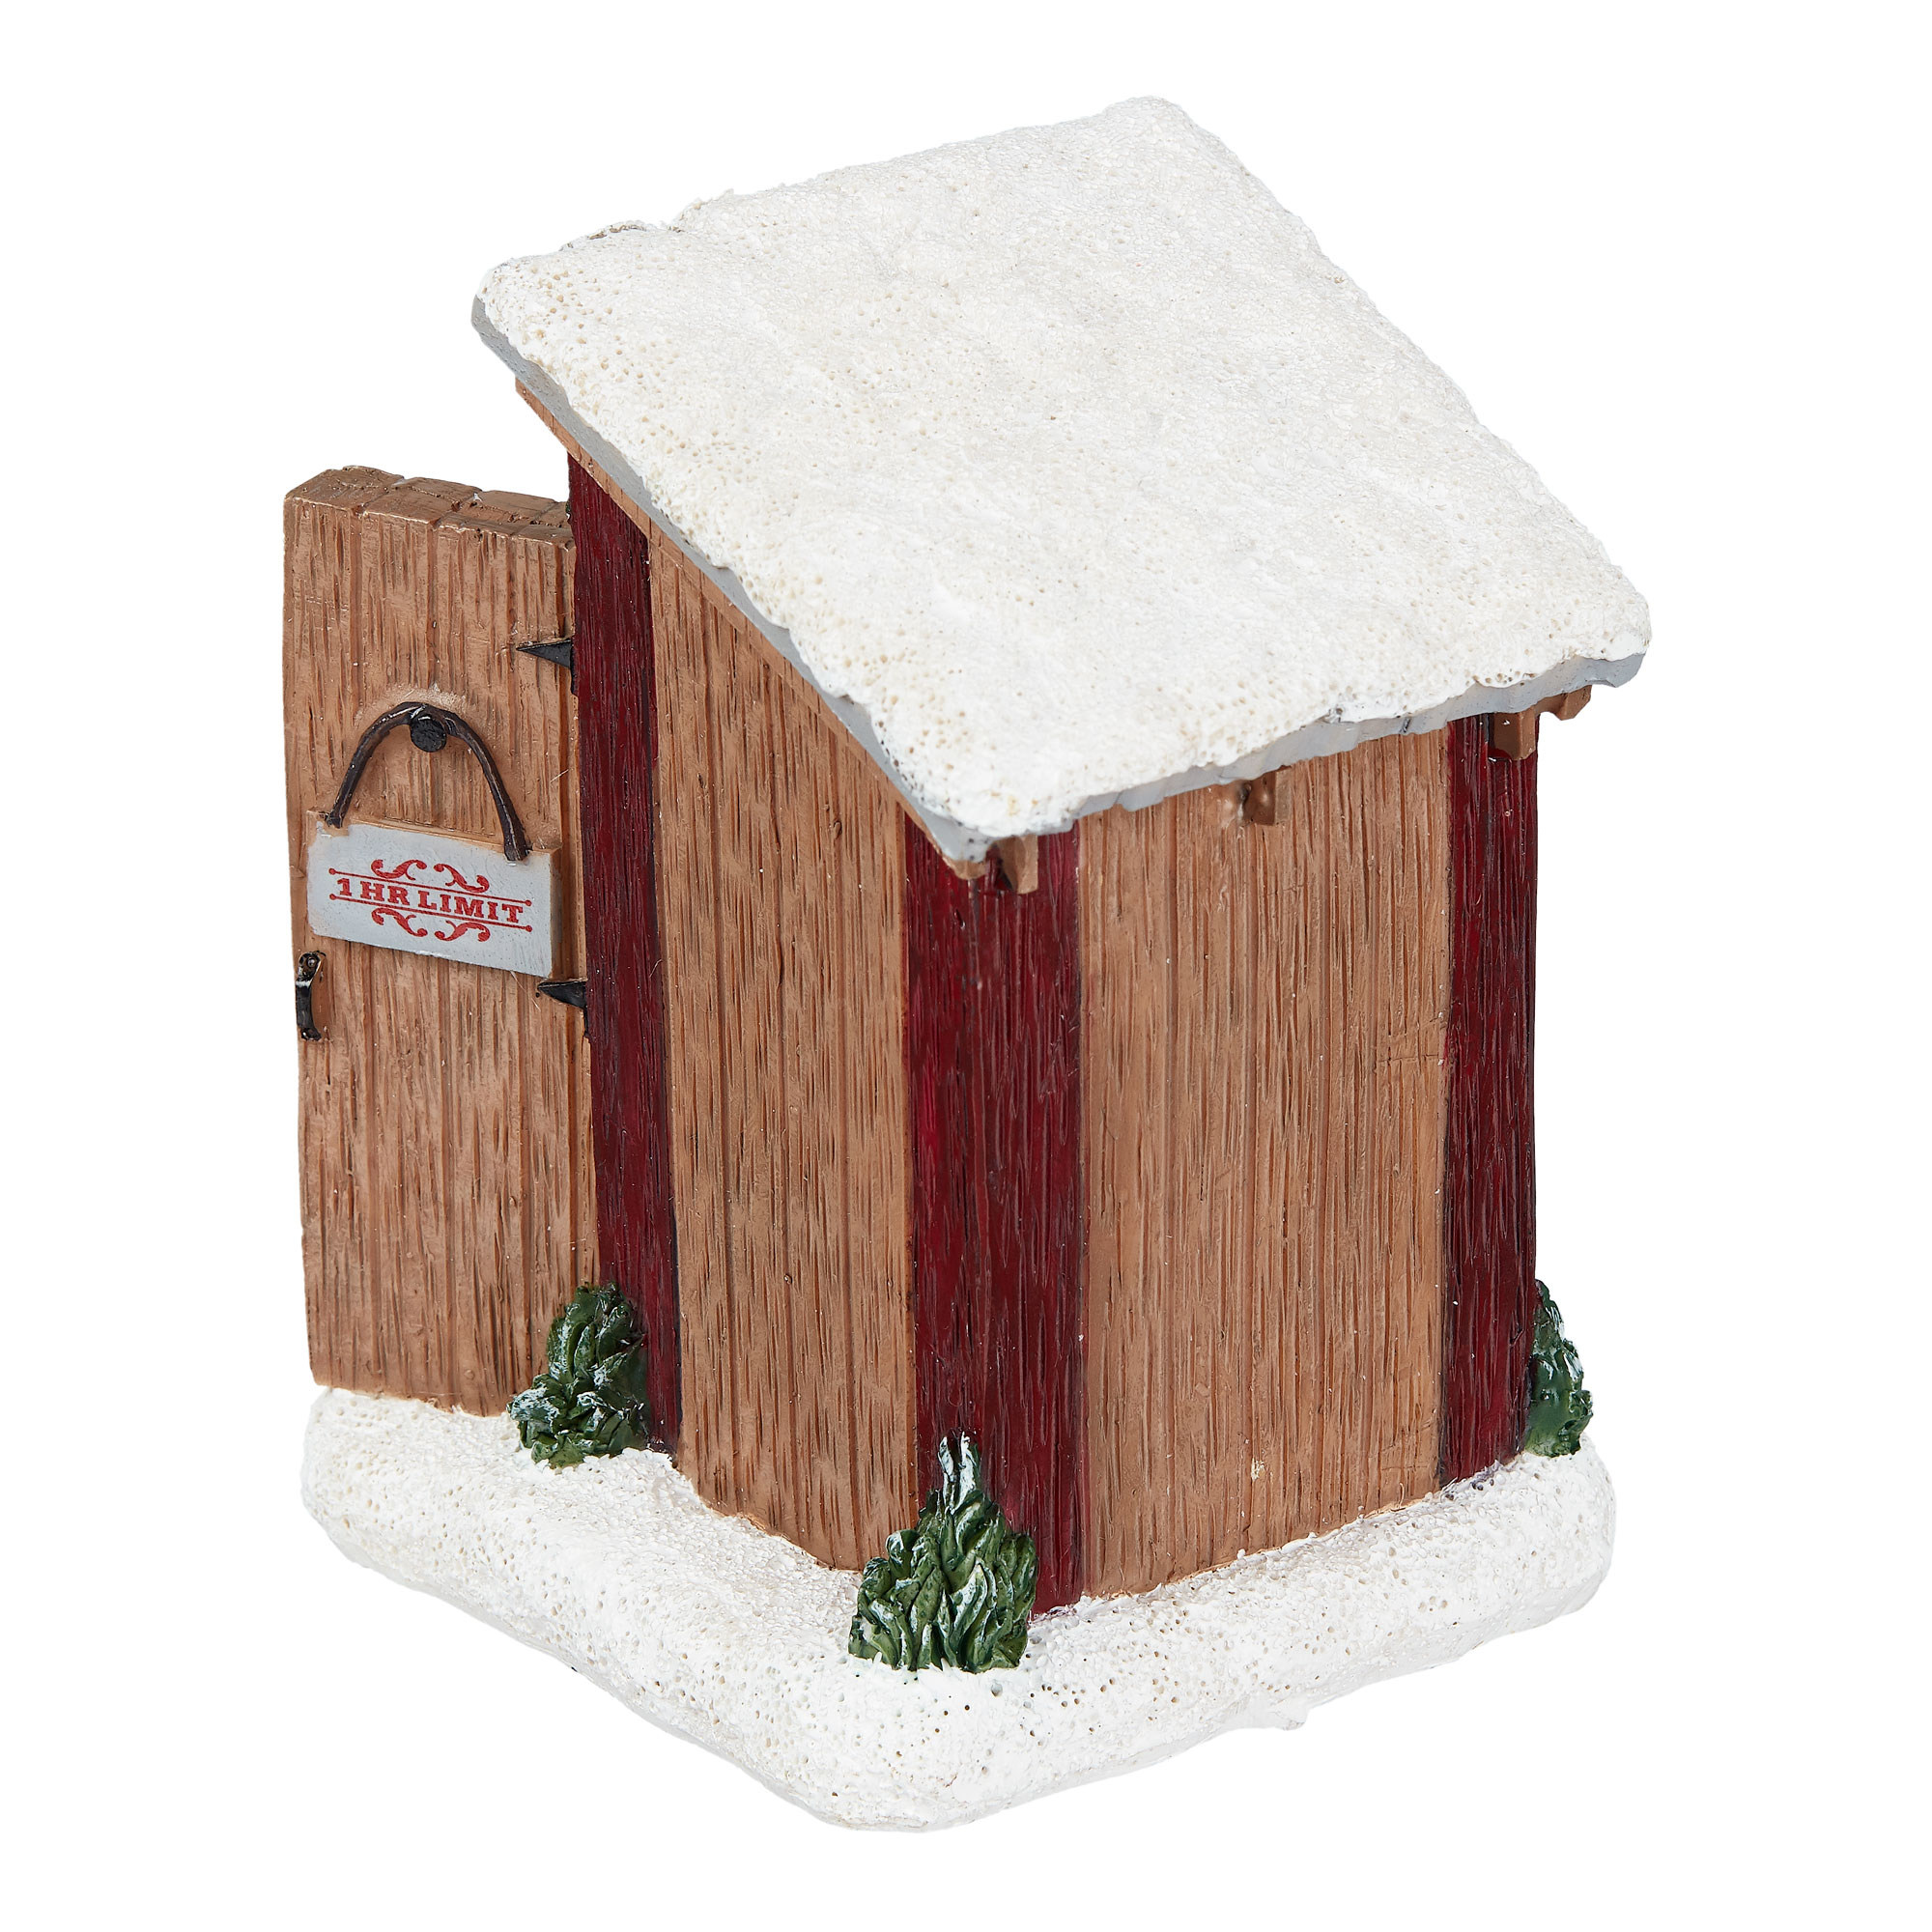 Holiday Time Santa in Outhouse Christmas Village Collectible Figurine Table Top Decoration - image 3 of 5